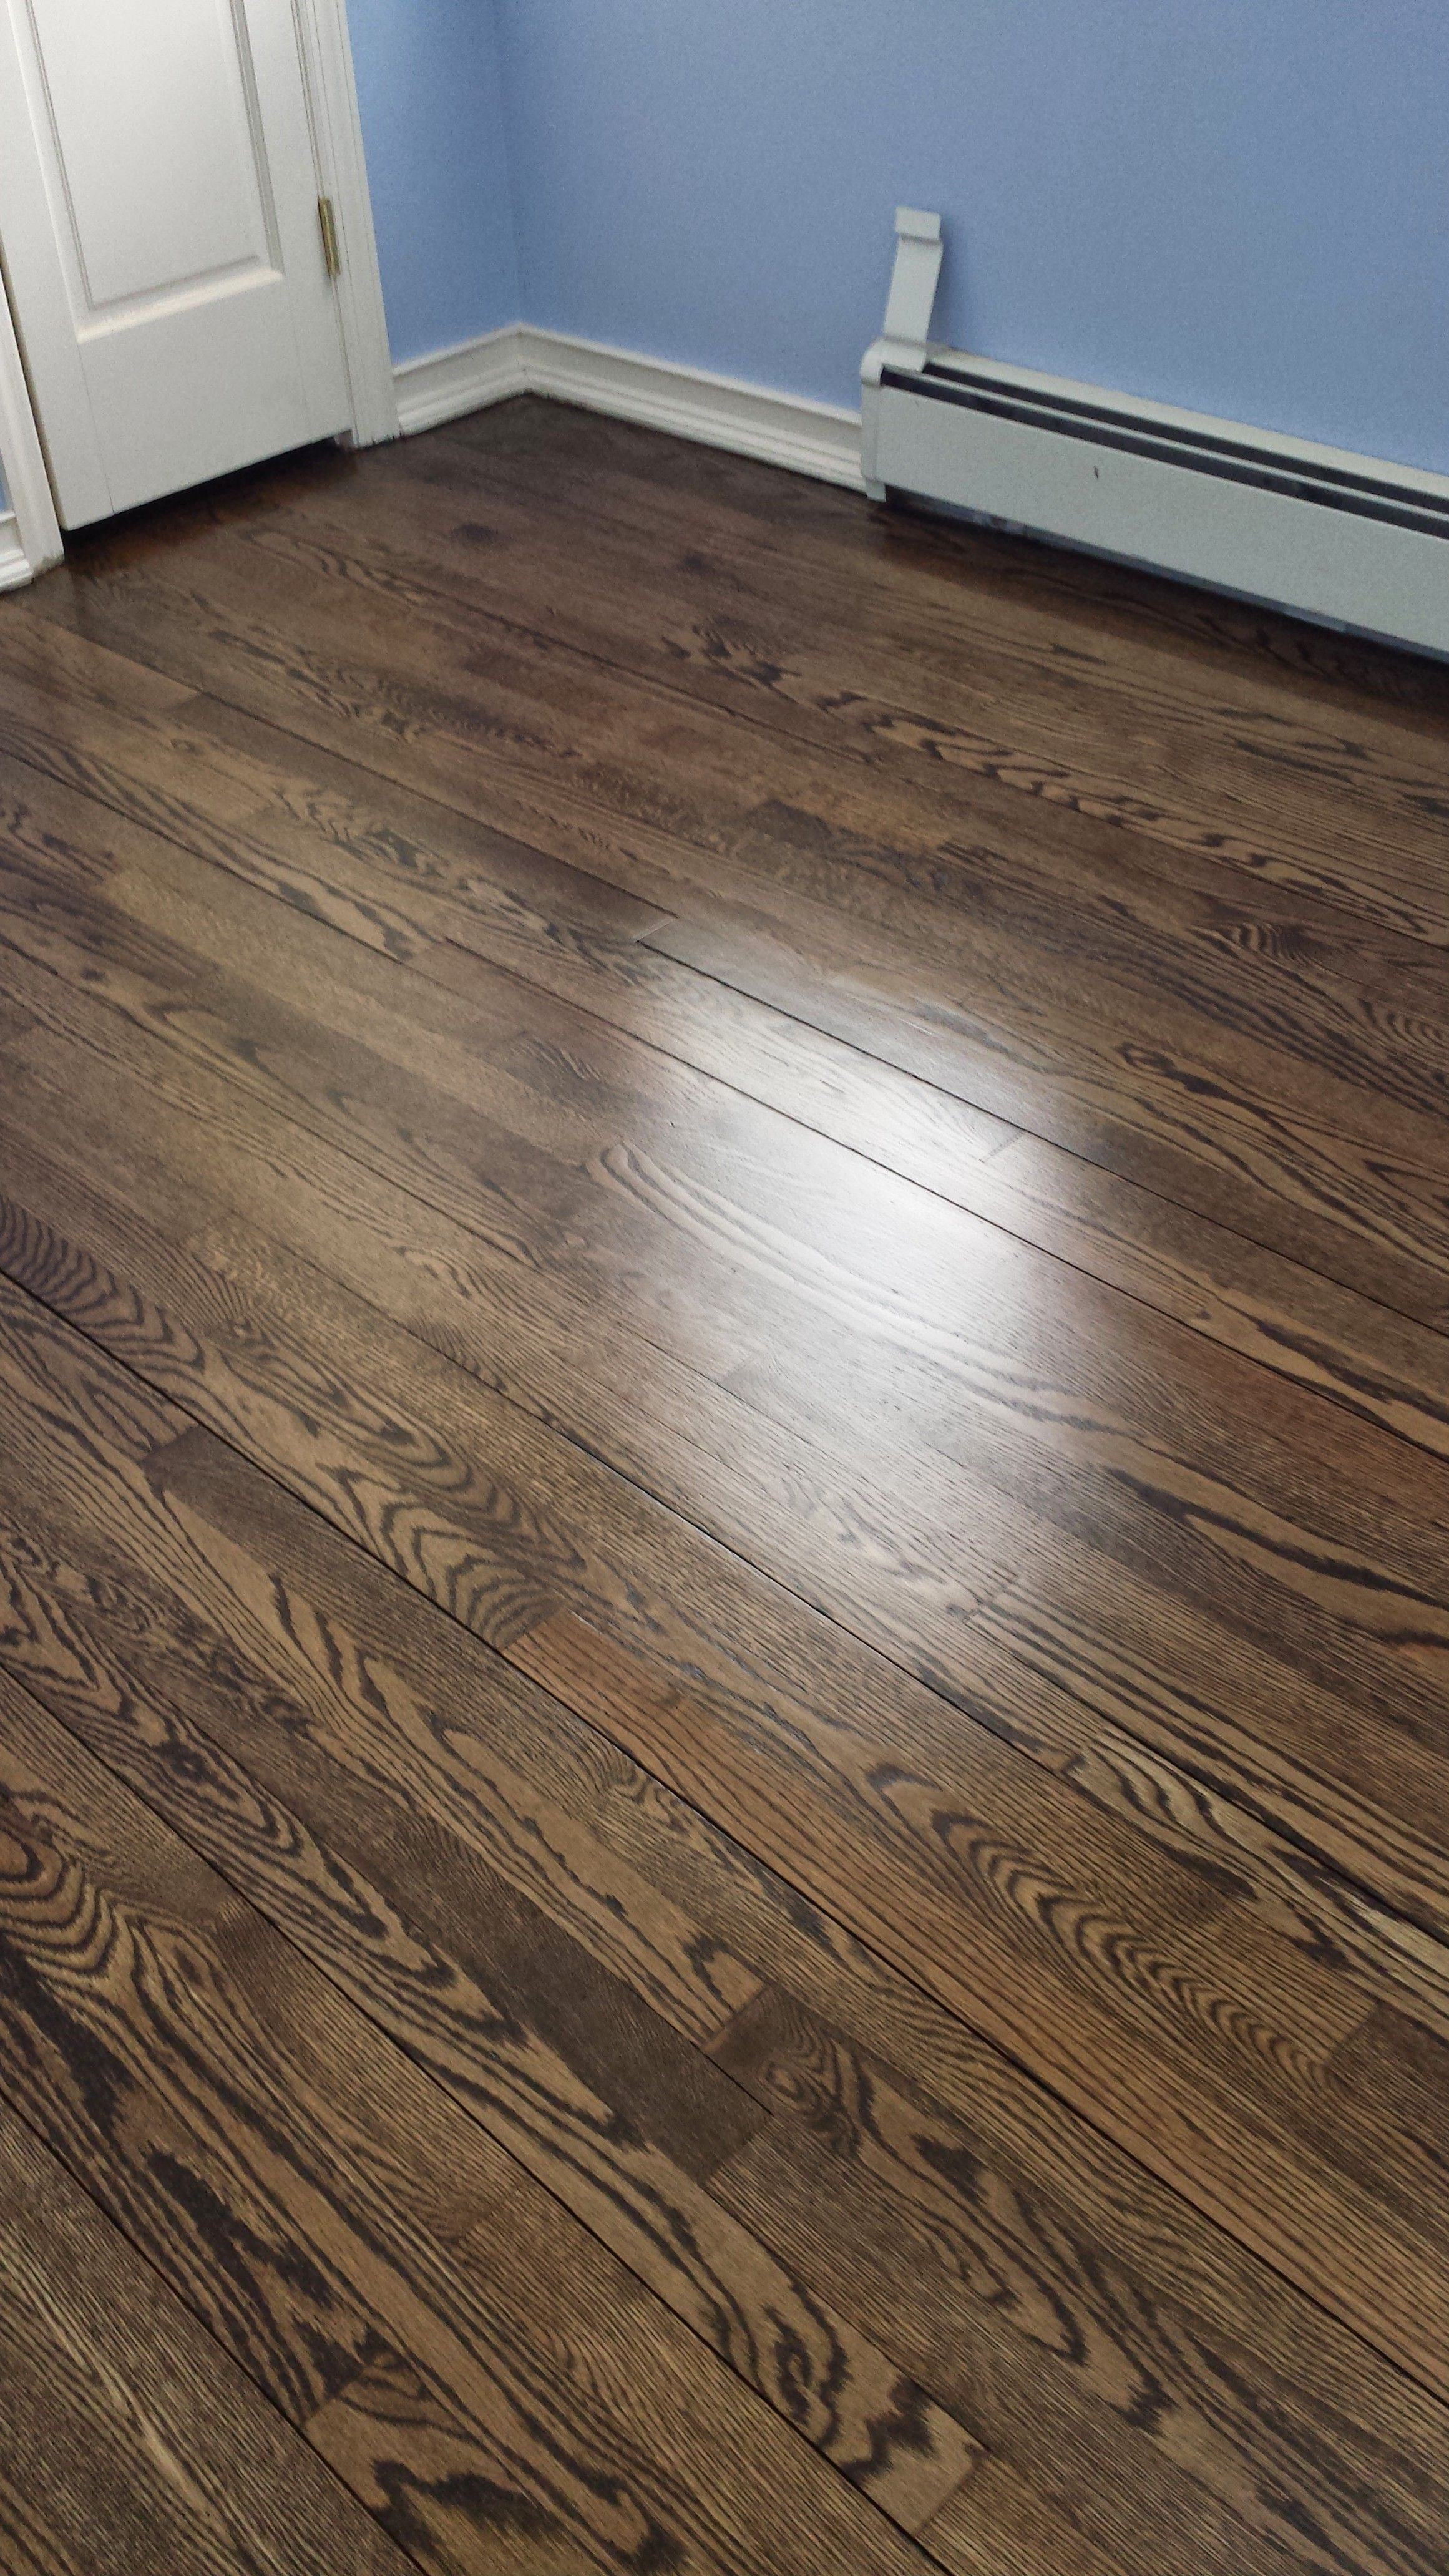 28 attractive Hardwood Floors and Water 2024 free download hardwood floors and water of hardwood floor repair hardwood floor water damage warping hardwood inside hardwood floor refinishing is an affordable way to spruce up your space without a full 